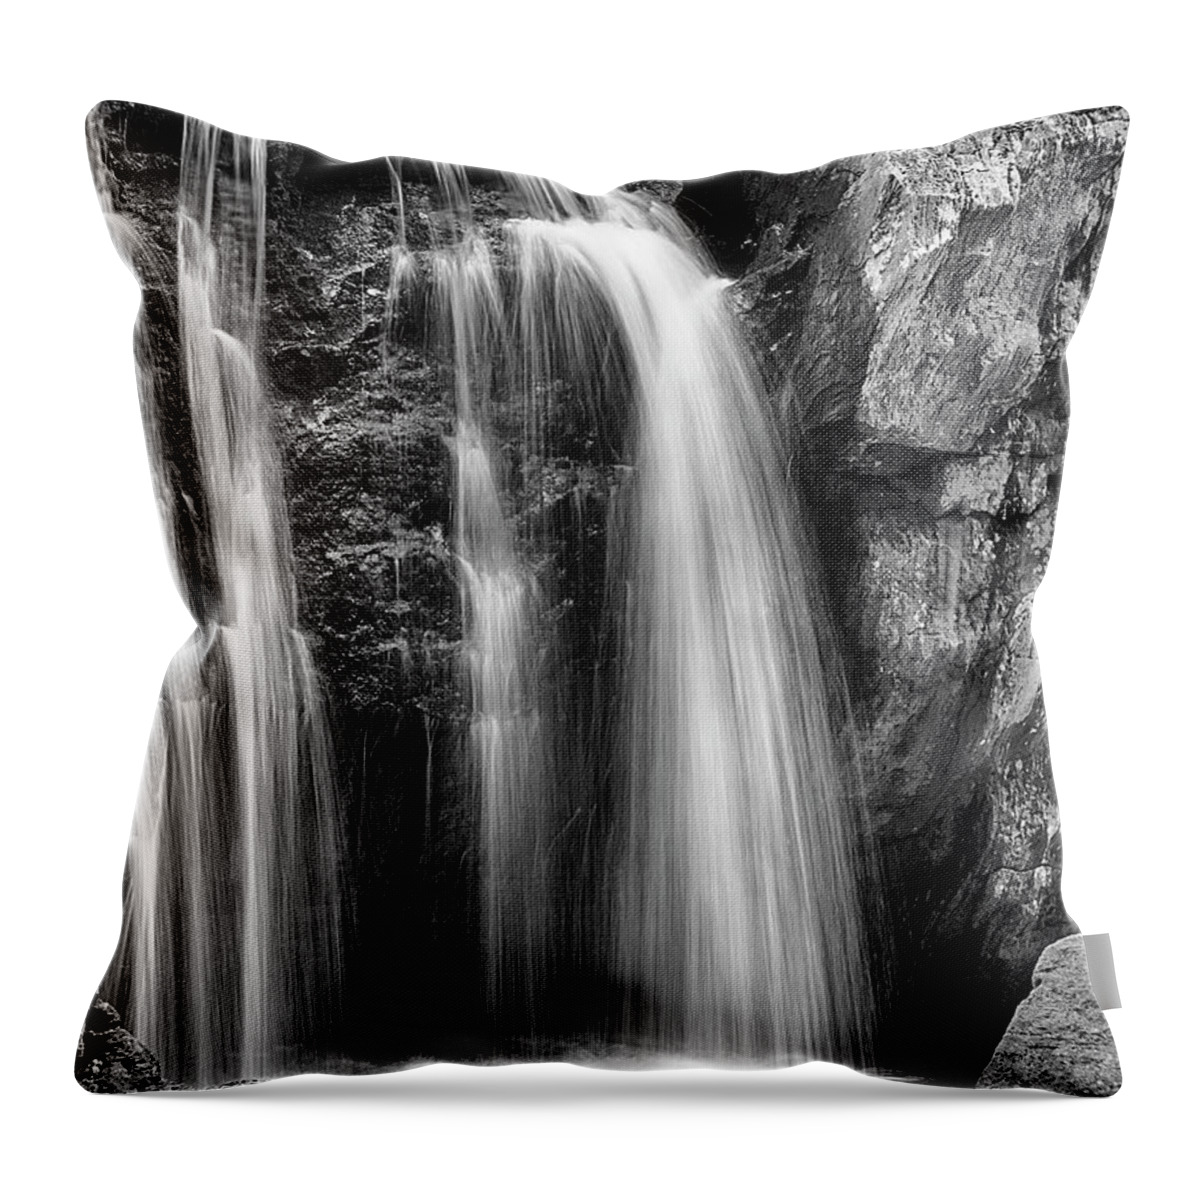 Cascading Throw Pillow featuring the photograph Kilgore Falls I by Charles Floyd